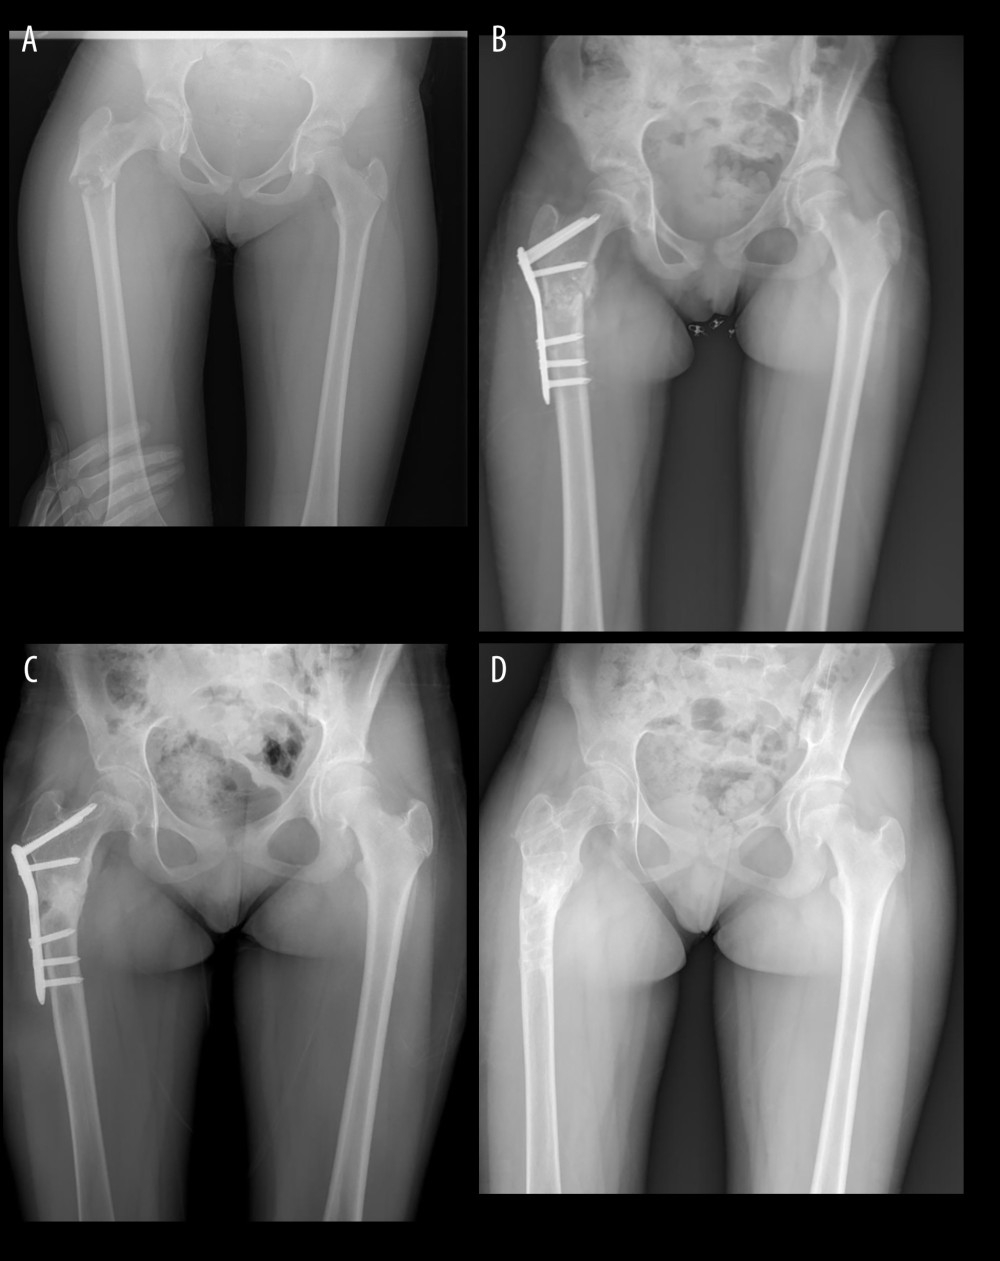 (A) Preoperative X-ray of a 12-year-old girl (Case 3). (B) Early postoperative X-ray of Case 3. (C) Postoperative 10. Month X-ray of Case 3. (D) Postoperative 2. year X-ray of Case 3.